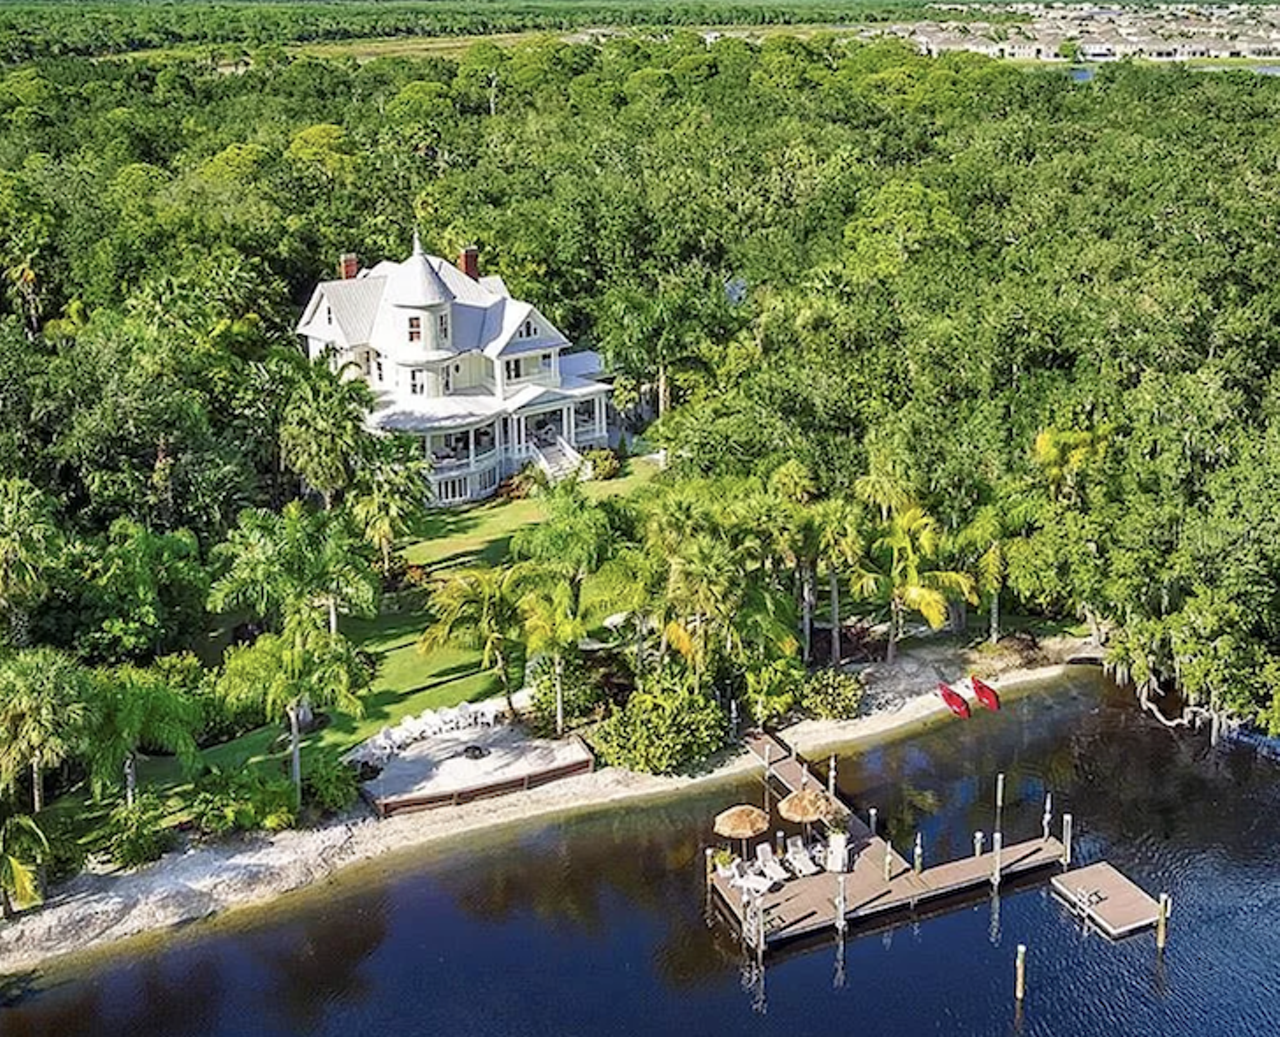 Lamb Manor, which was once famously barged across Tampa Bay, just sold for $1.6 million